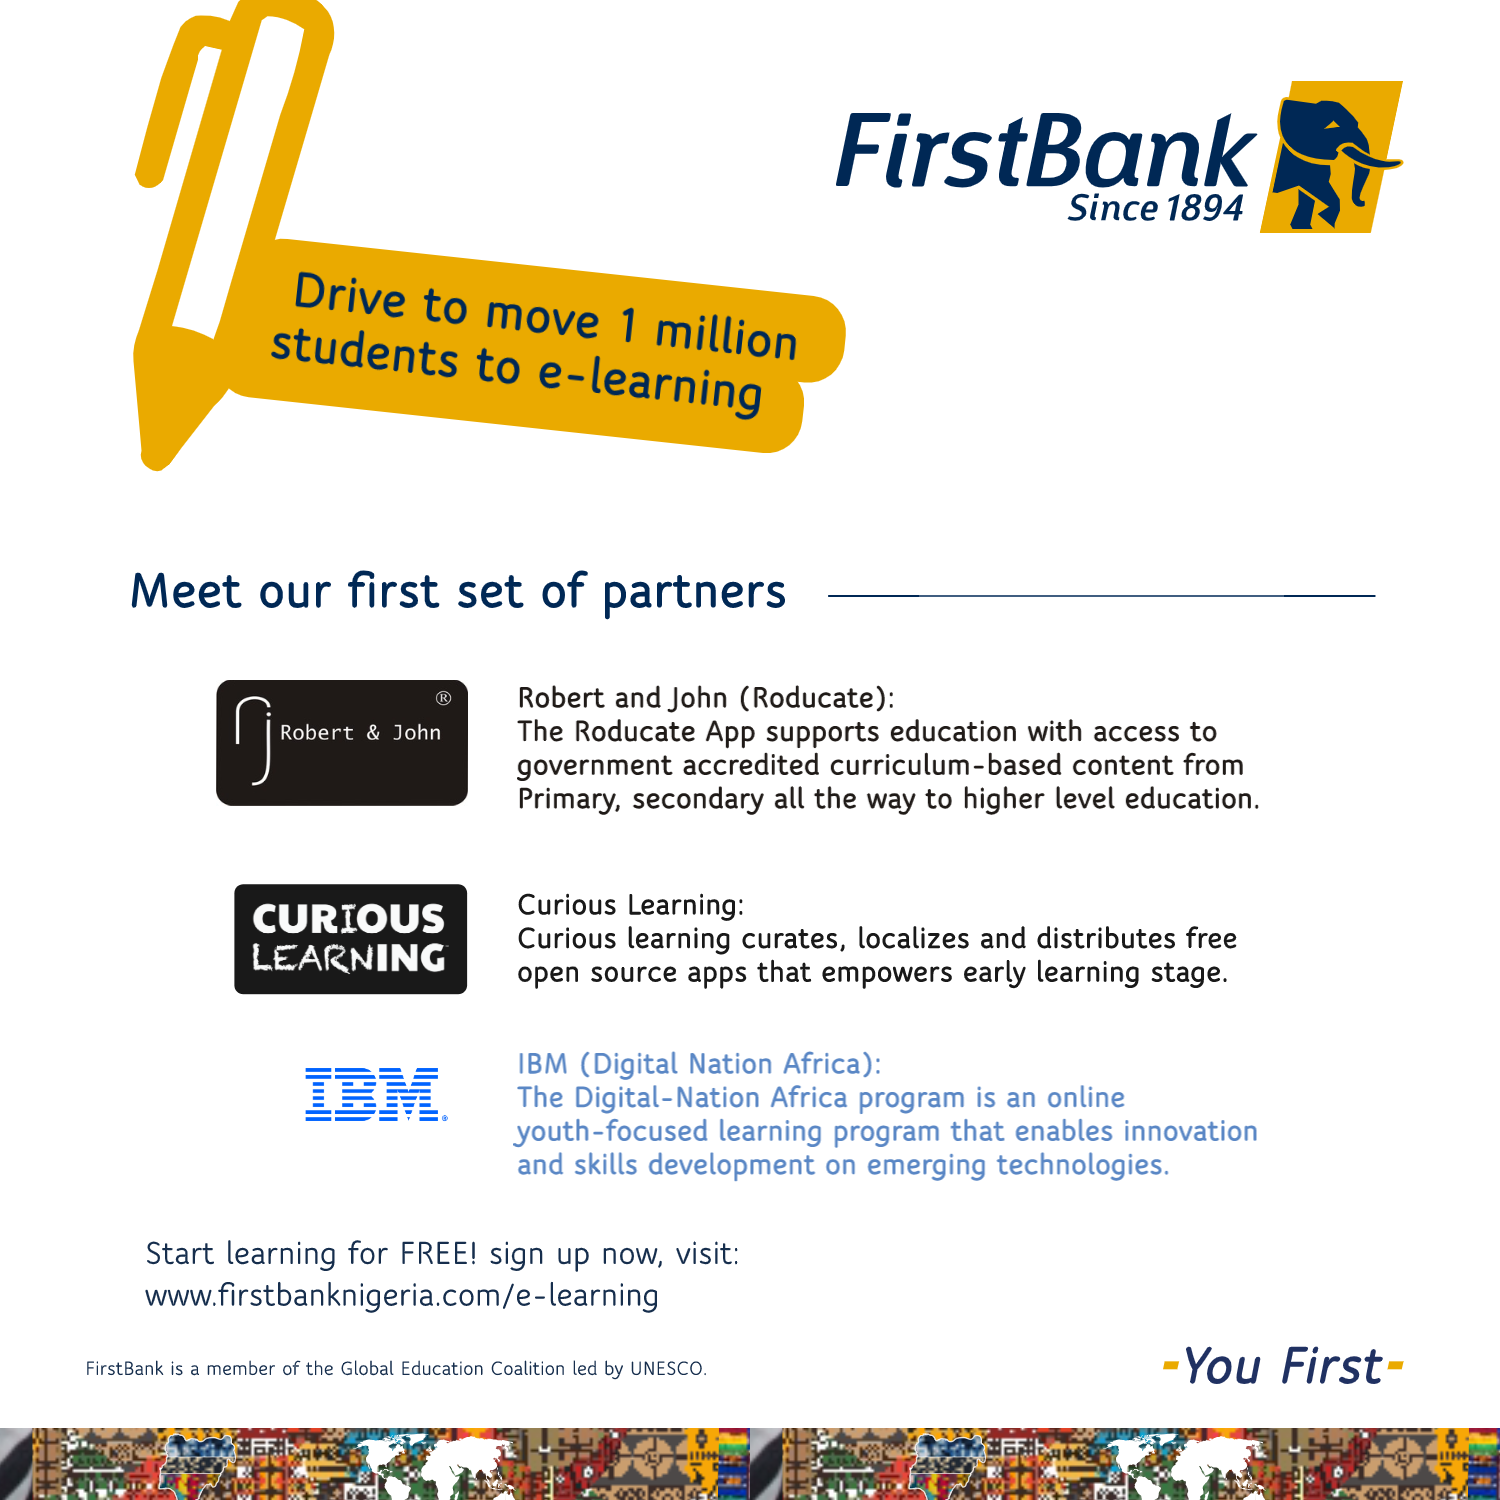 To Foster Continuous learning, FirstBank launches e-learning